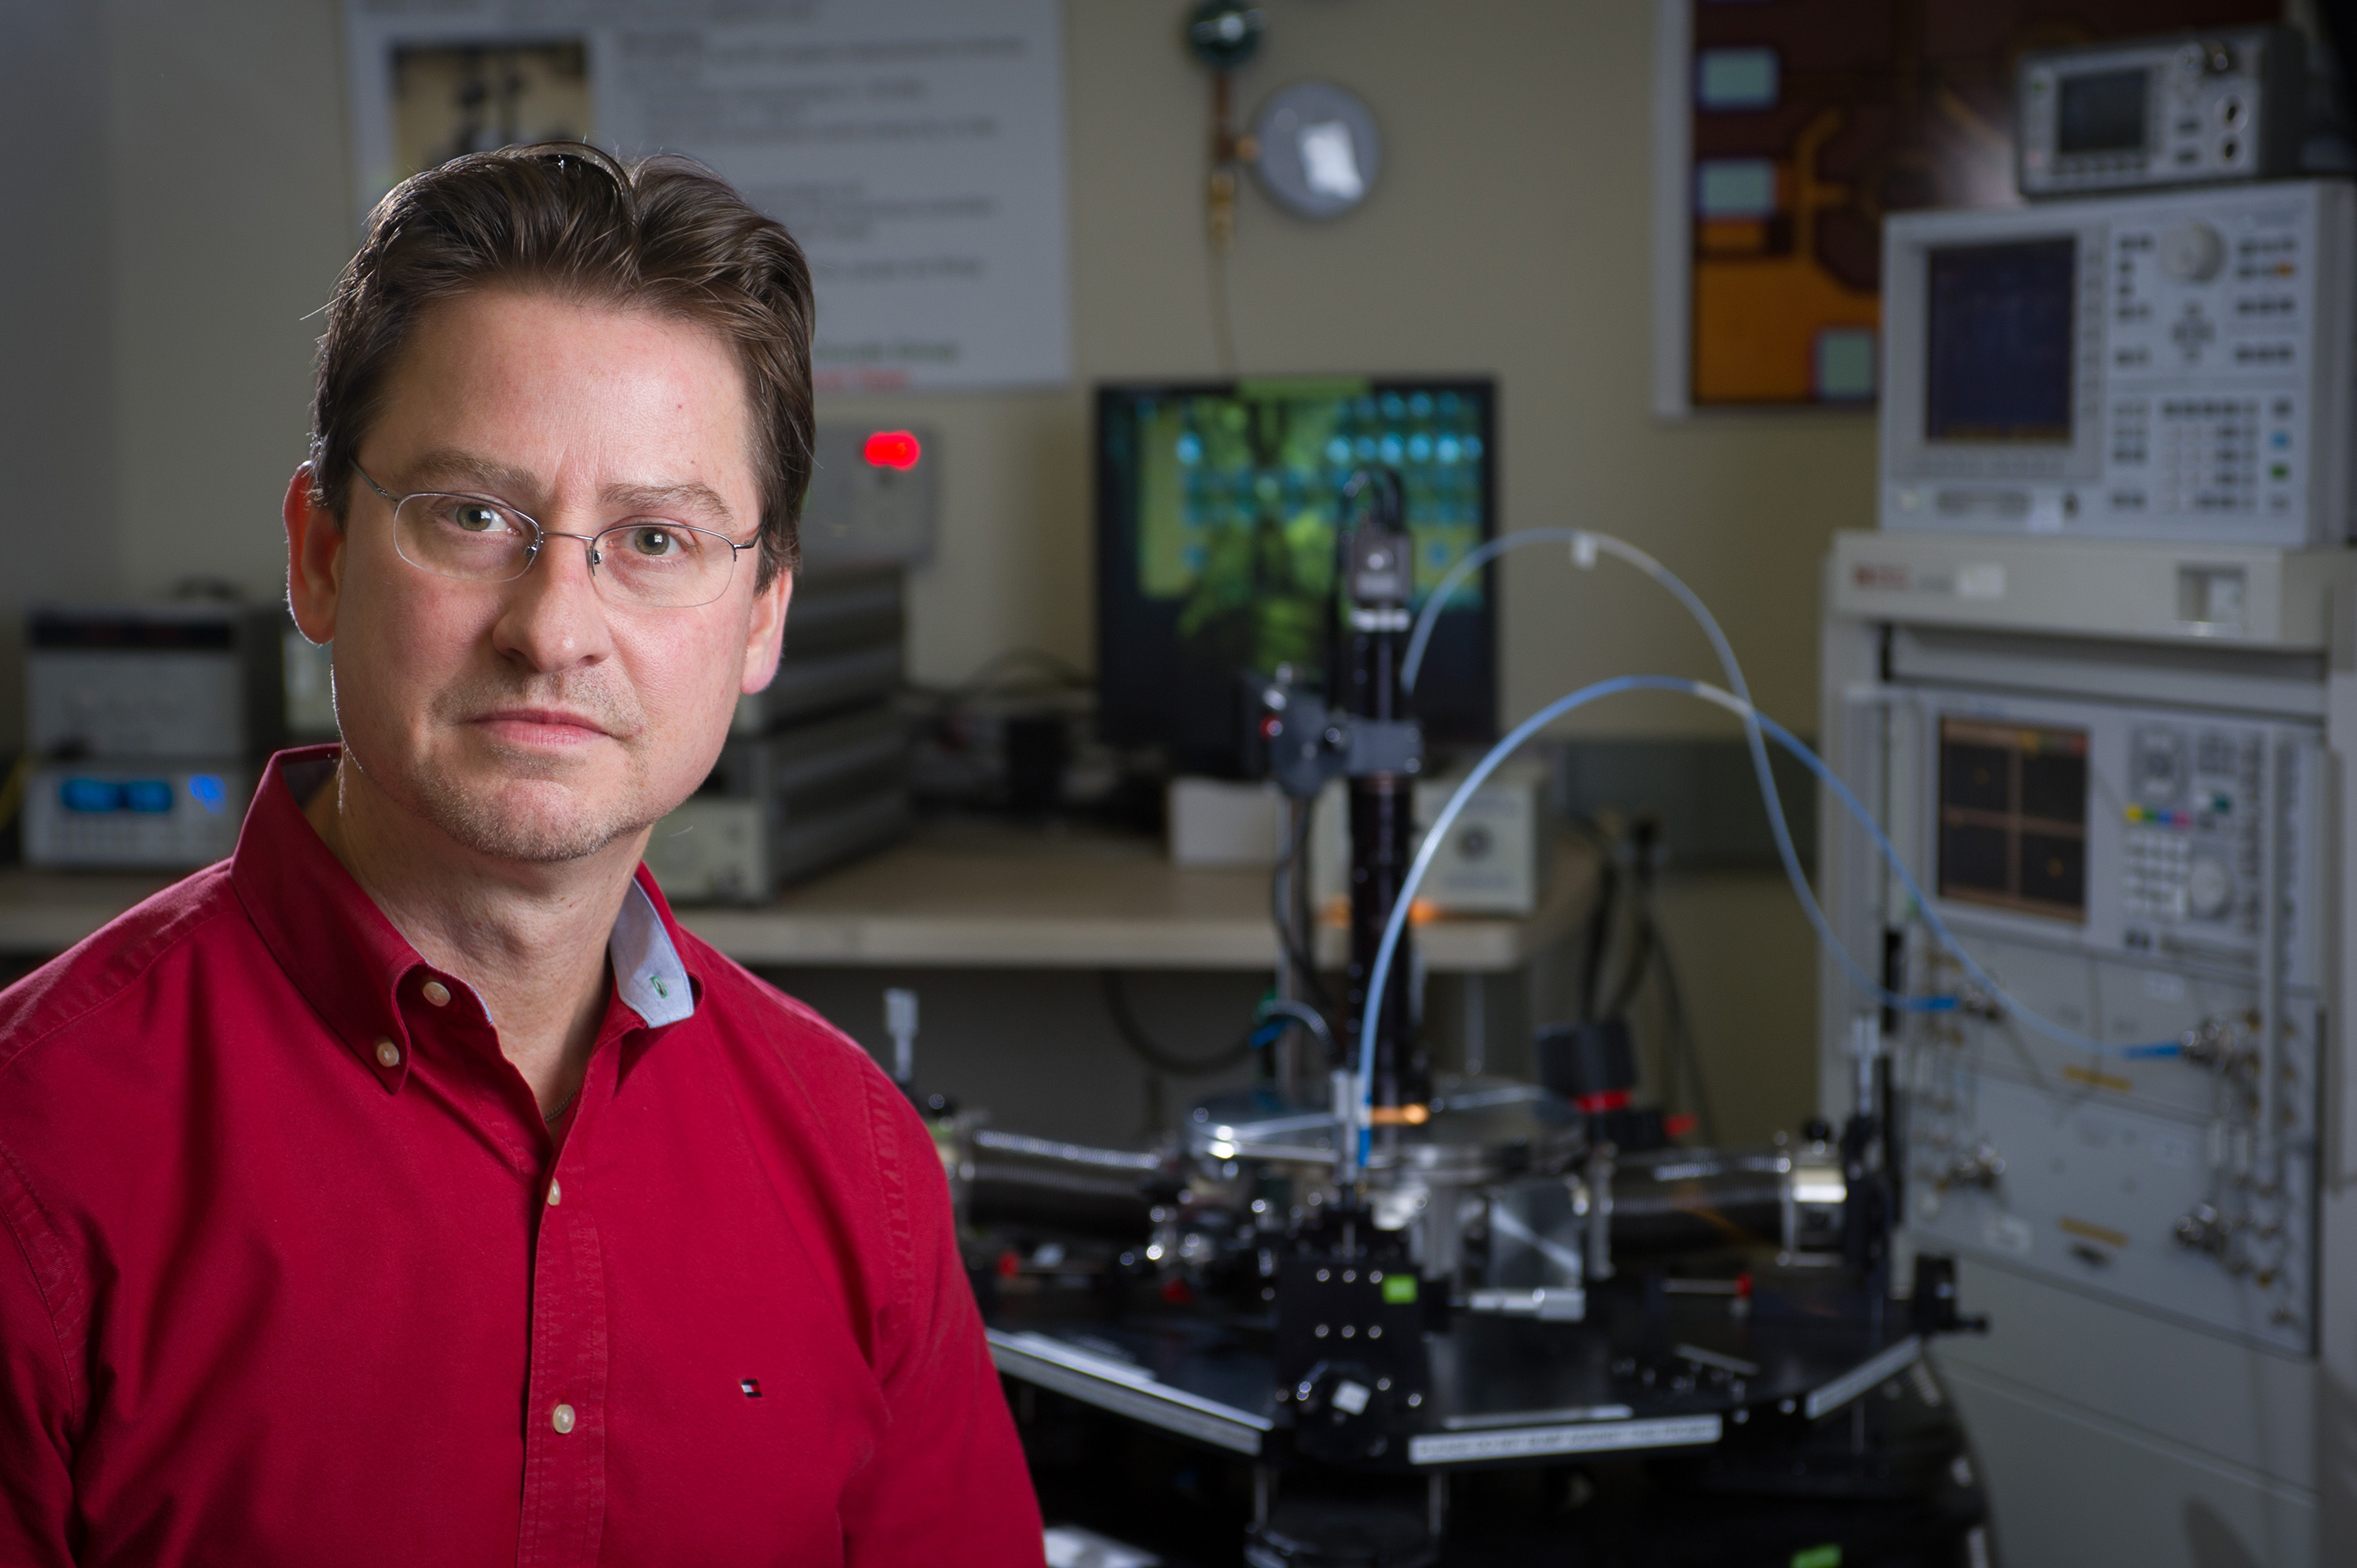 Professor John Cressler led a Georgia Tech team that recently demonstrated the world's fastest silicon-based device to date, in collaboration with IHP-Innovations for High Performance Microelectronics in Germany. The investigators operated a silicon-germanium (SiGe) transistor at 798 gigahertz (GHz) fMAX, exceeding the previous speed record for silicon-germanium chips by about 200 GHz. (Georgia Tech Photo: Rob Felt)